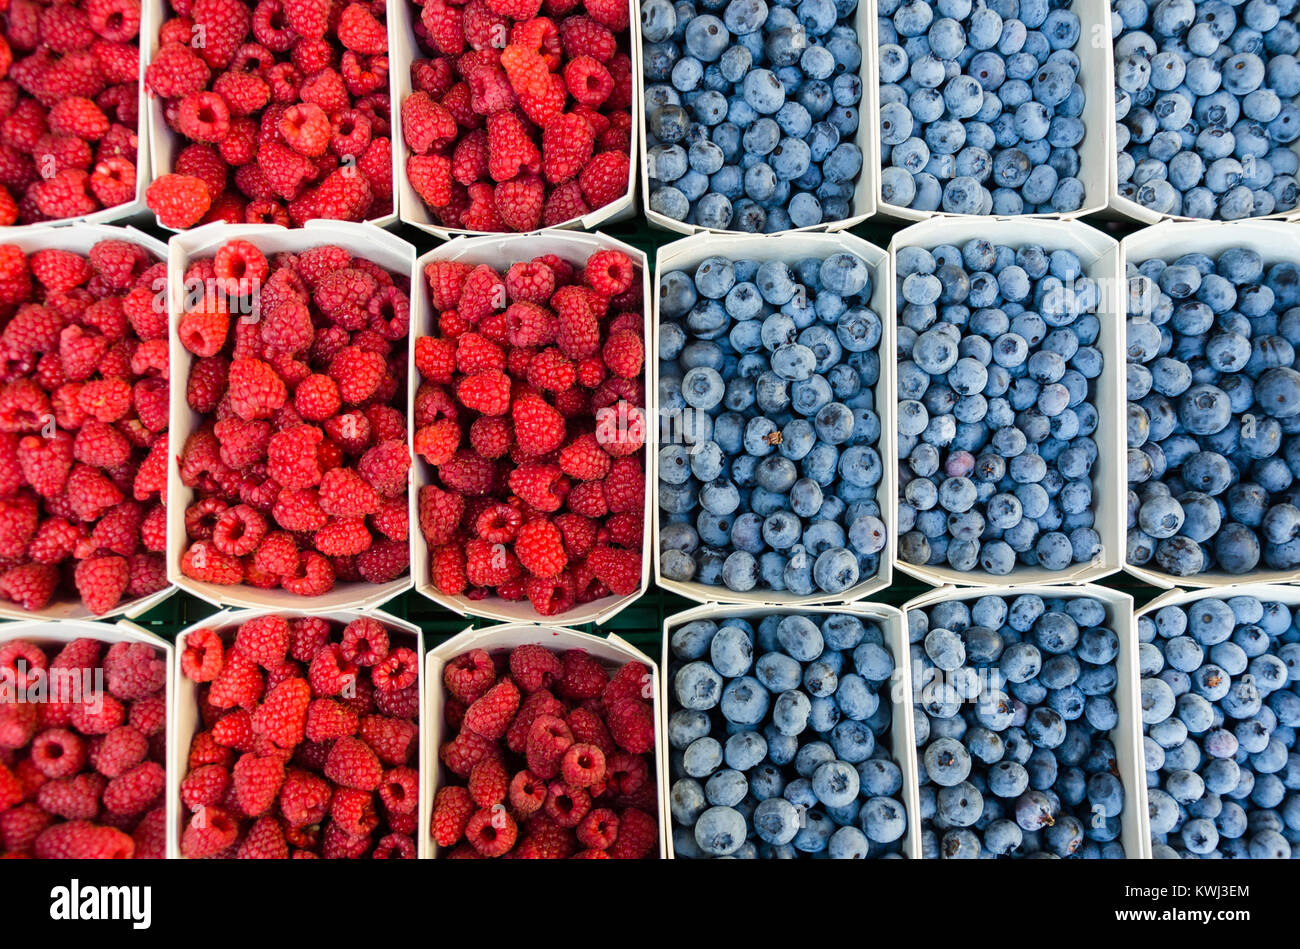 Full Frame Shot Of A Mix Of Raspberries And Blueberries Separated Midway. Stock Photo